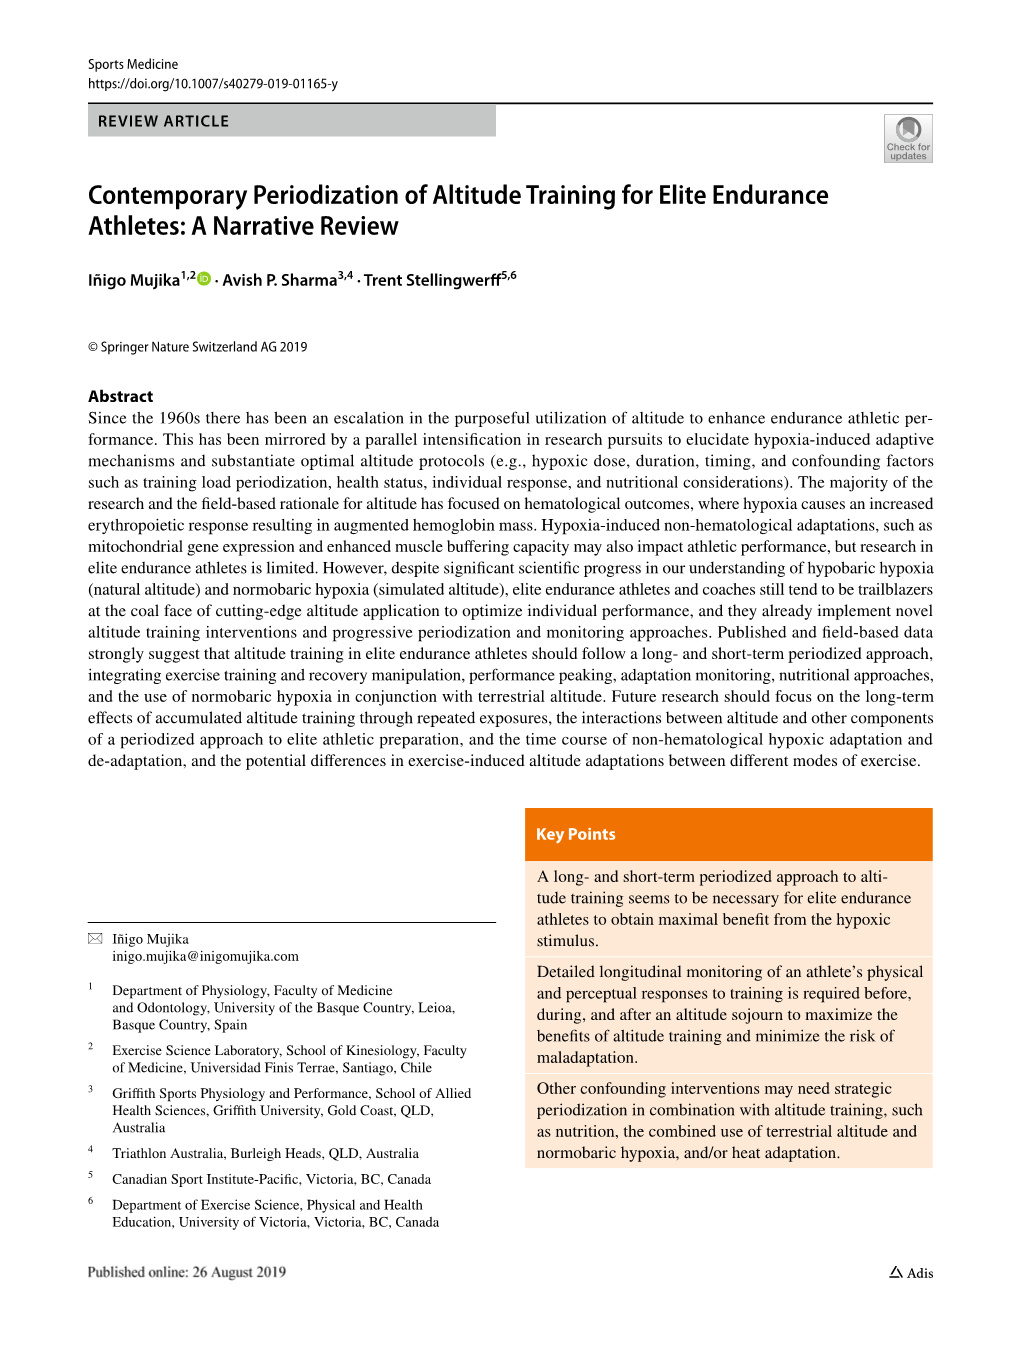 Contemporary Periodization of Altitude Training for Elite Endurance Athletes: a Narrative Review